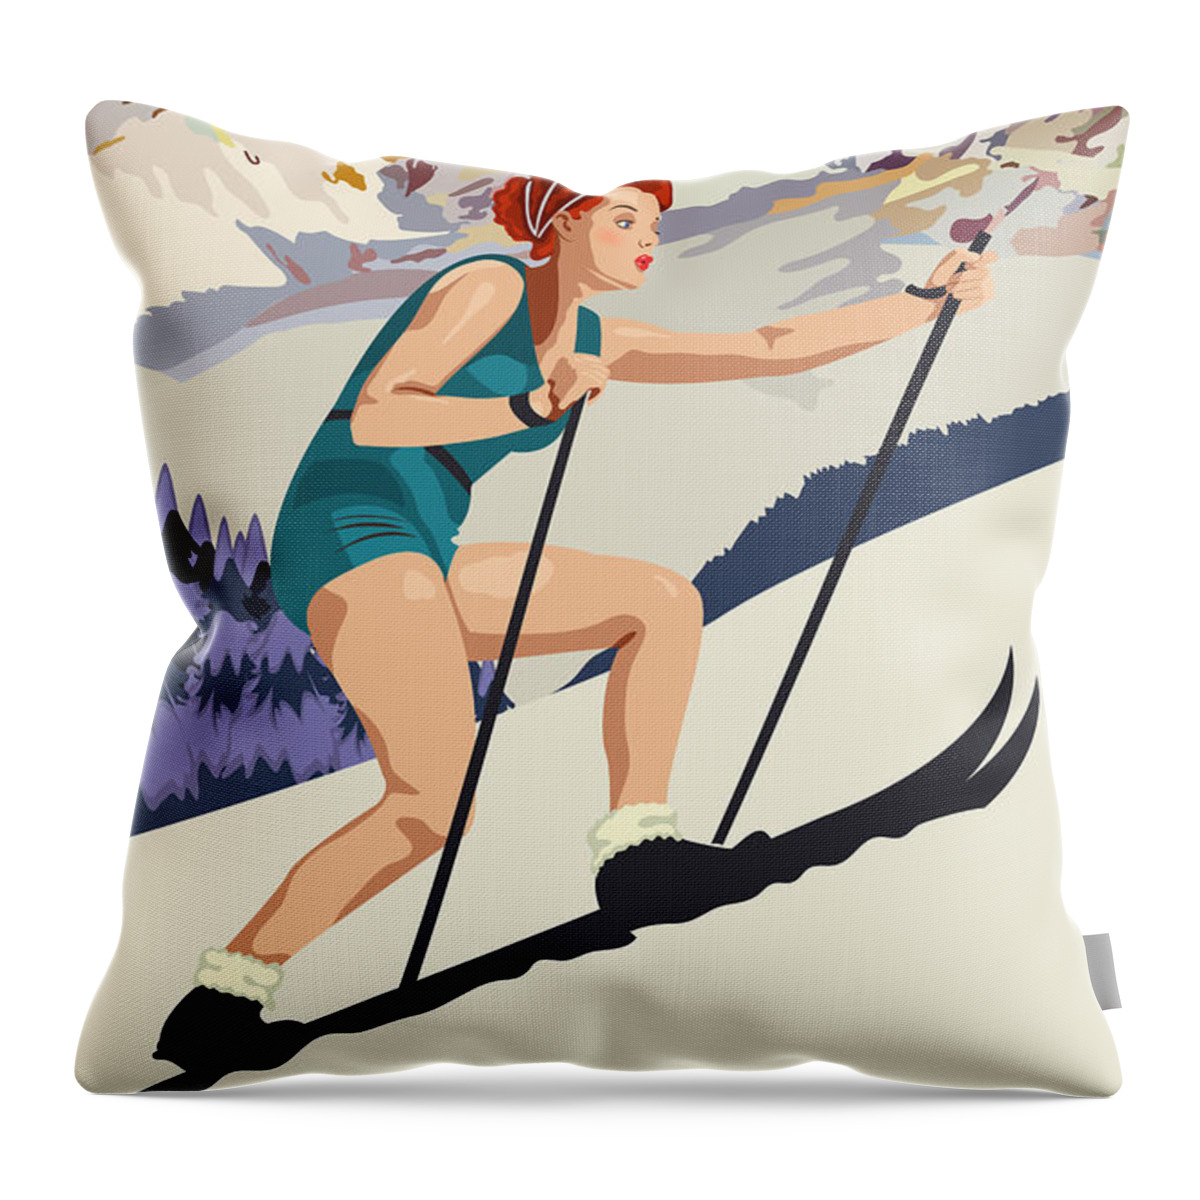 Pinup Throw Pillow featuring the digital art Pinup Girl on Ski School at Colorado Mountains by Long Shot